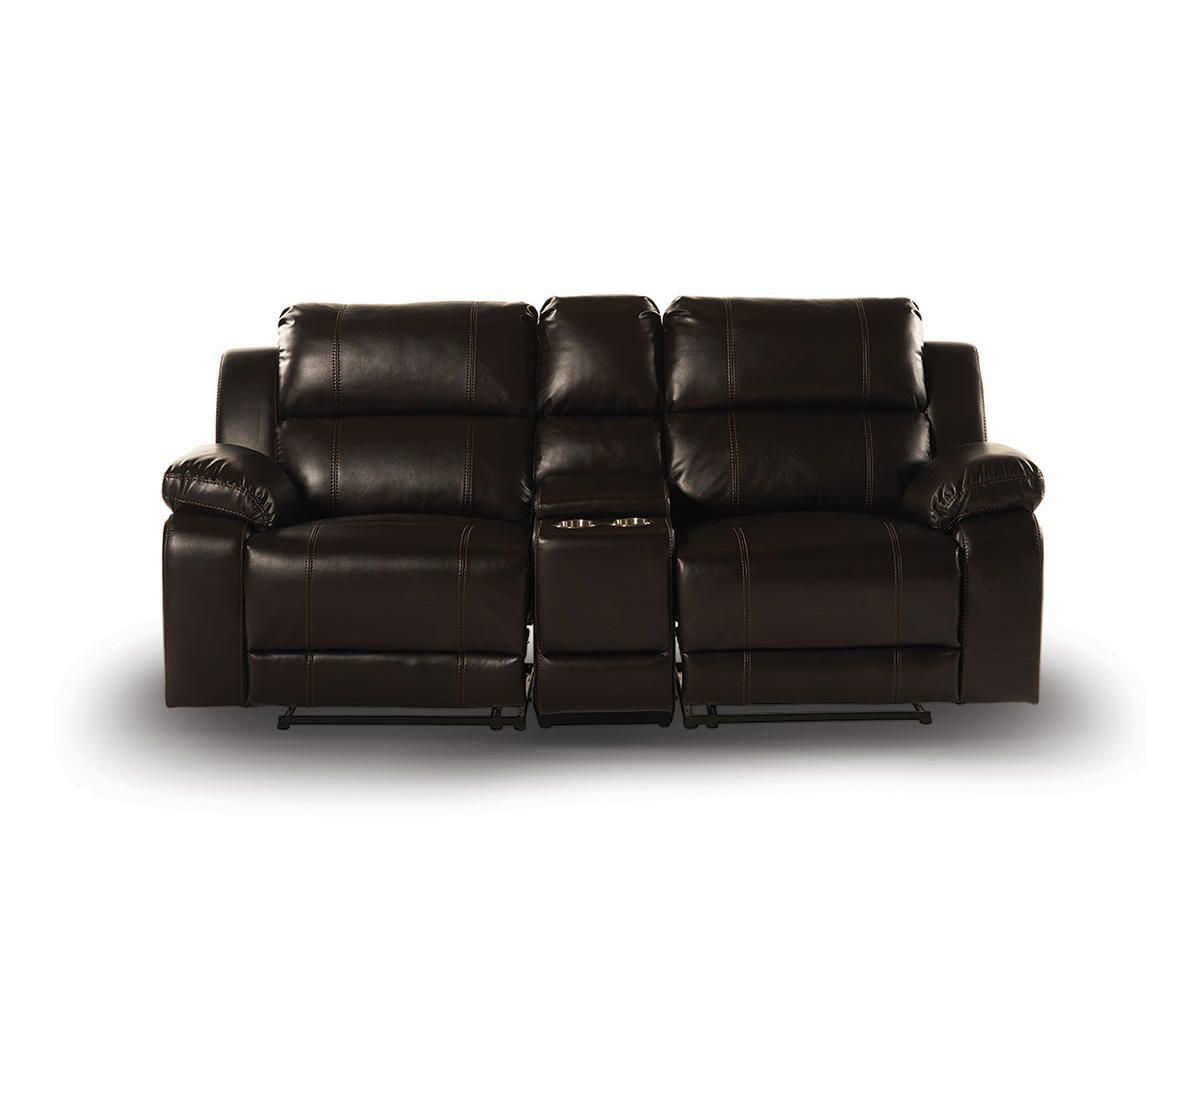 Picture of BRISTOL MANUAL RECLINING CONSOLE LOVESEAT